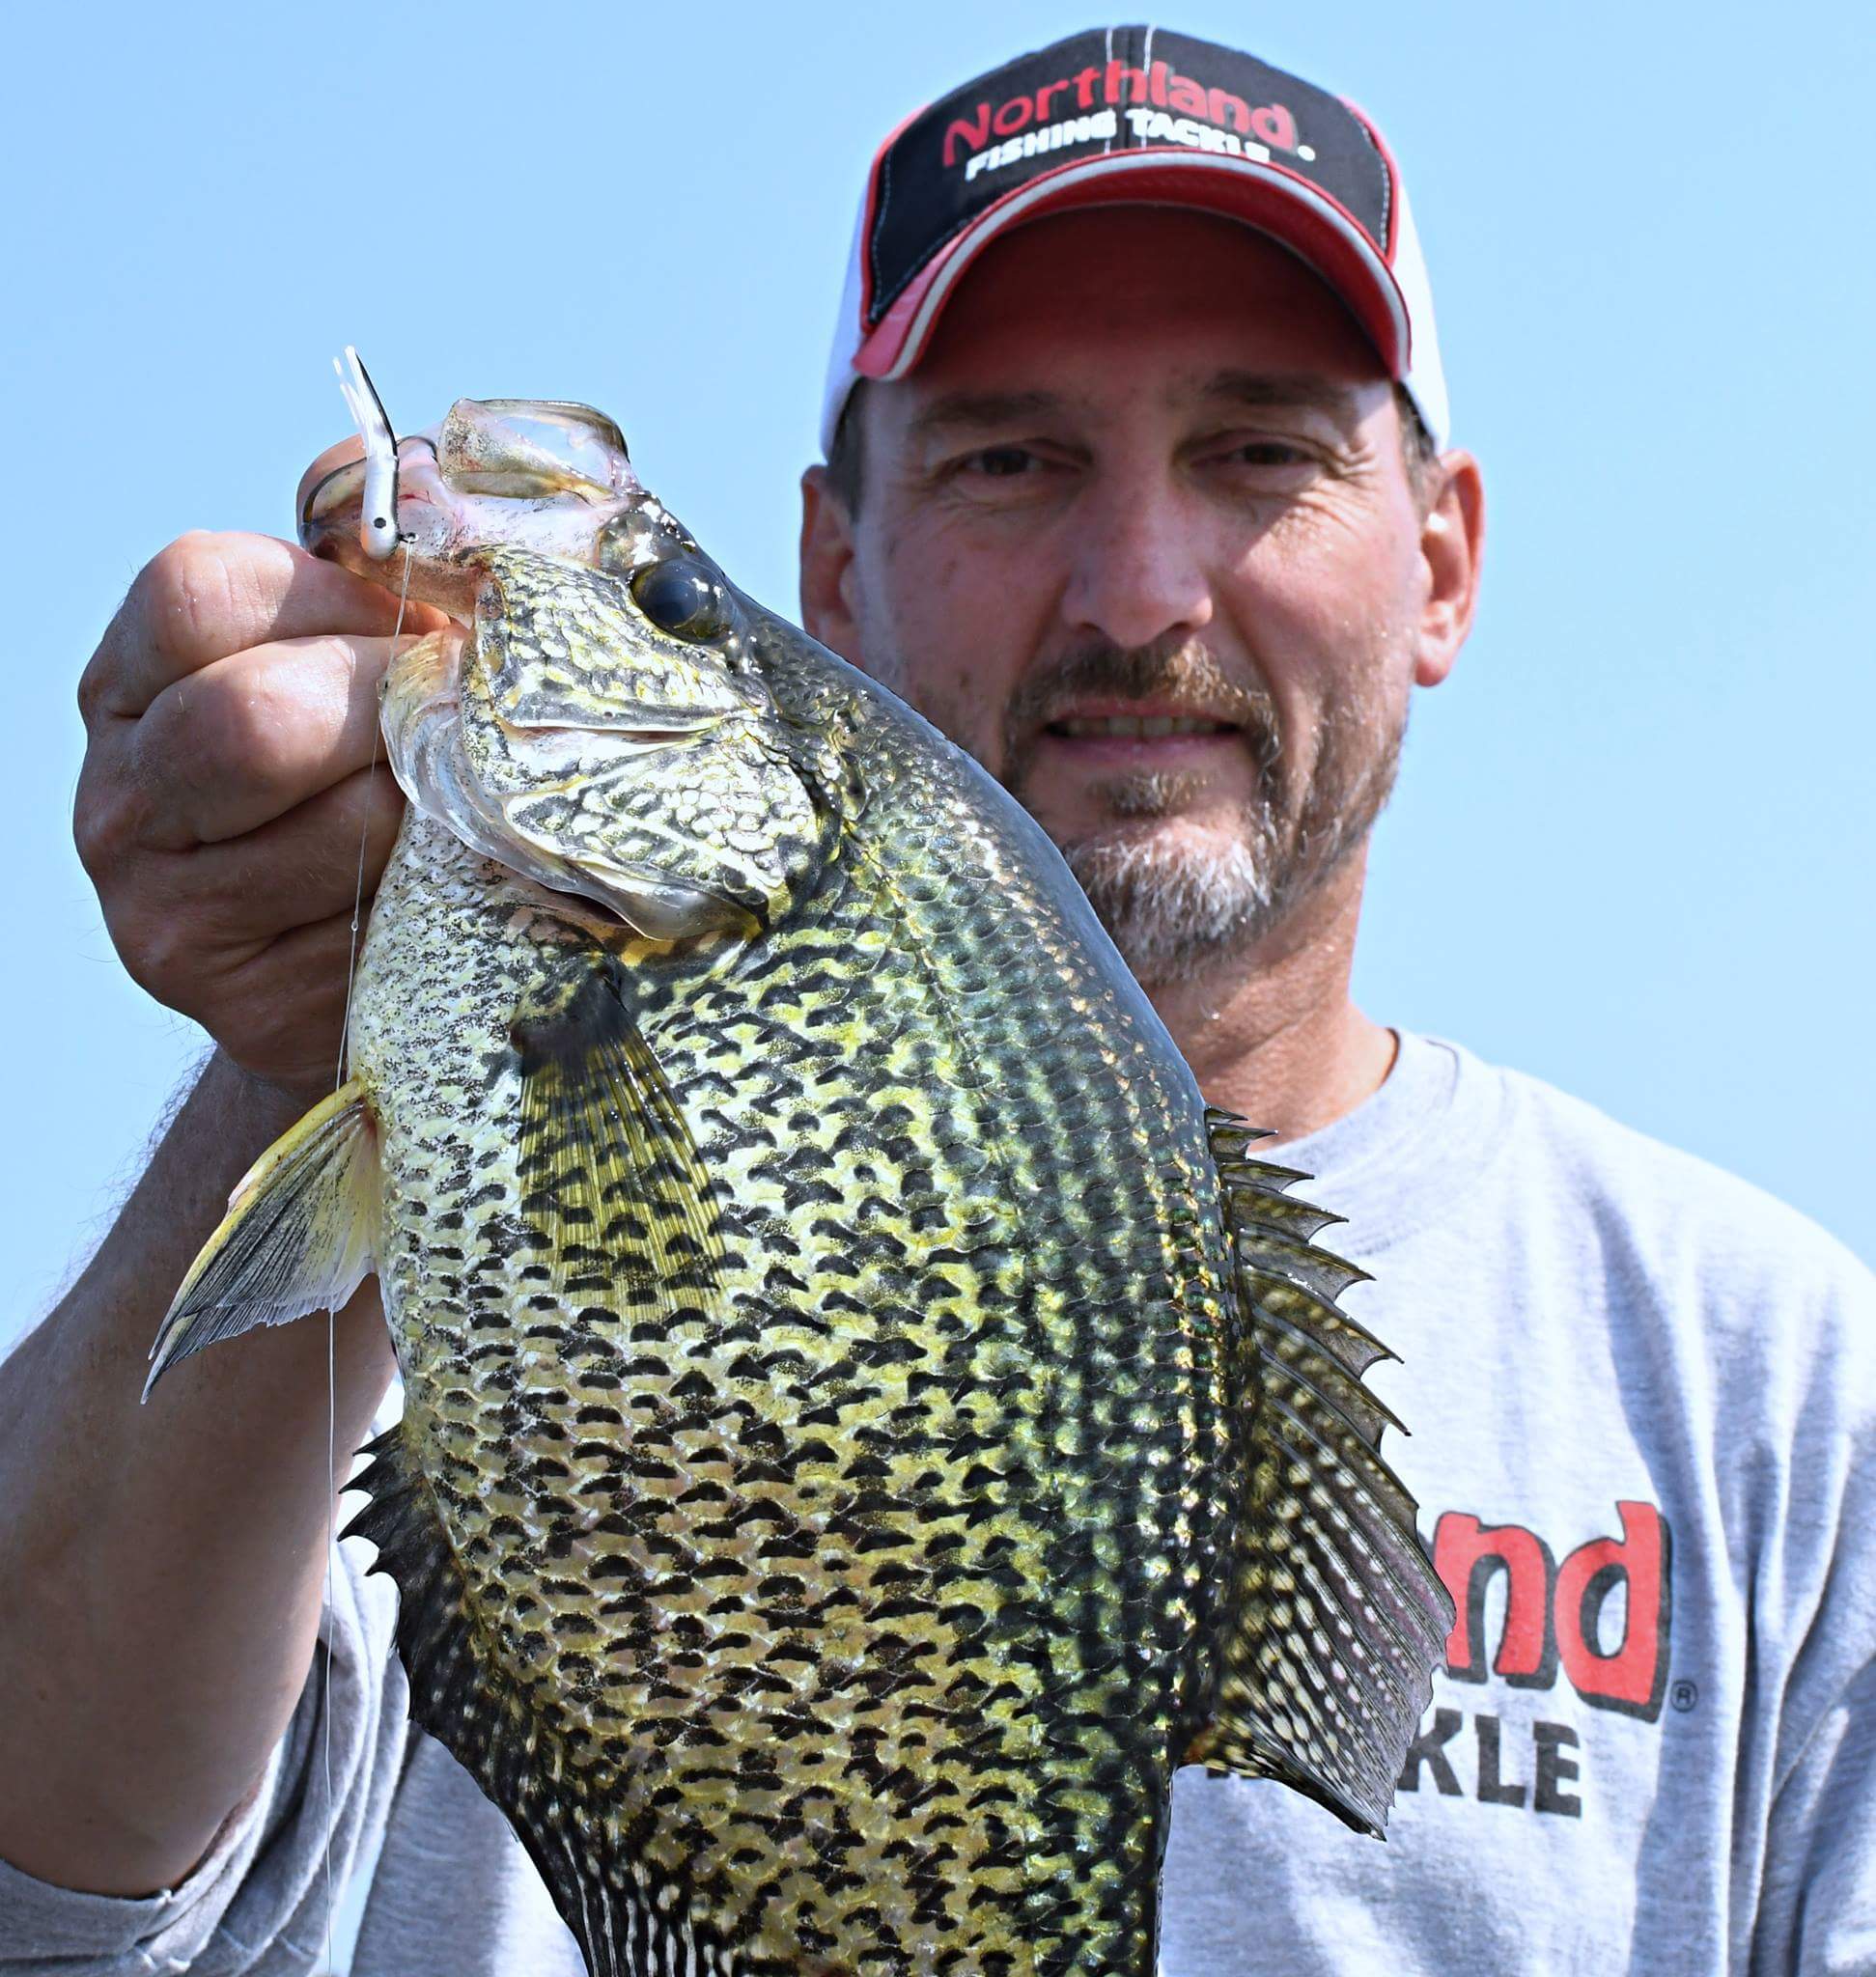 Fisherman holding up a crappie he caught on a soft plastic tube bait.